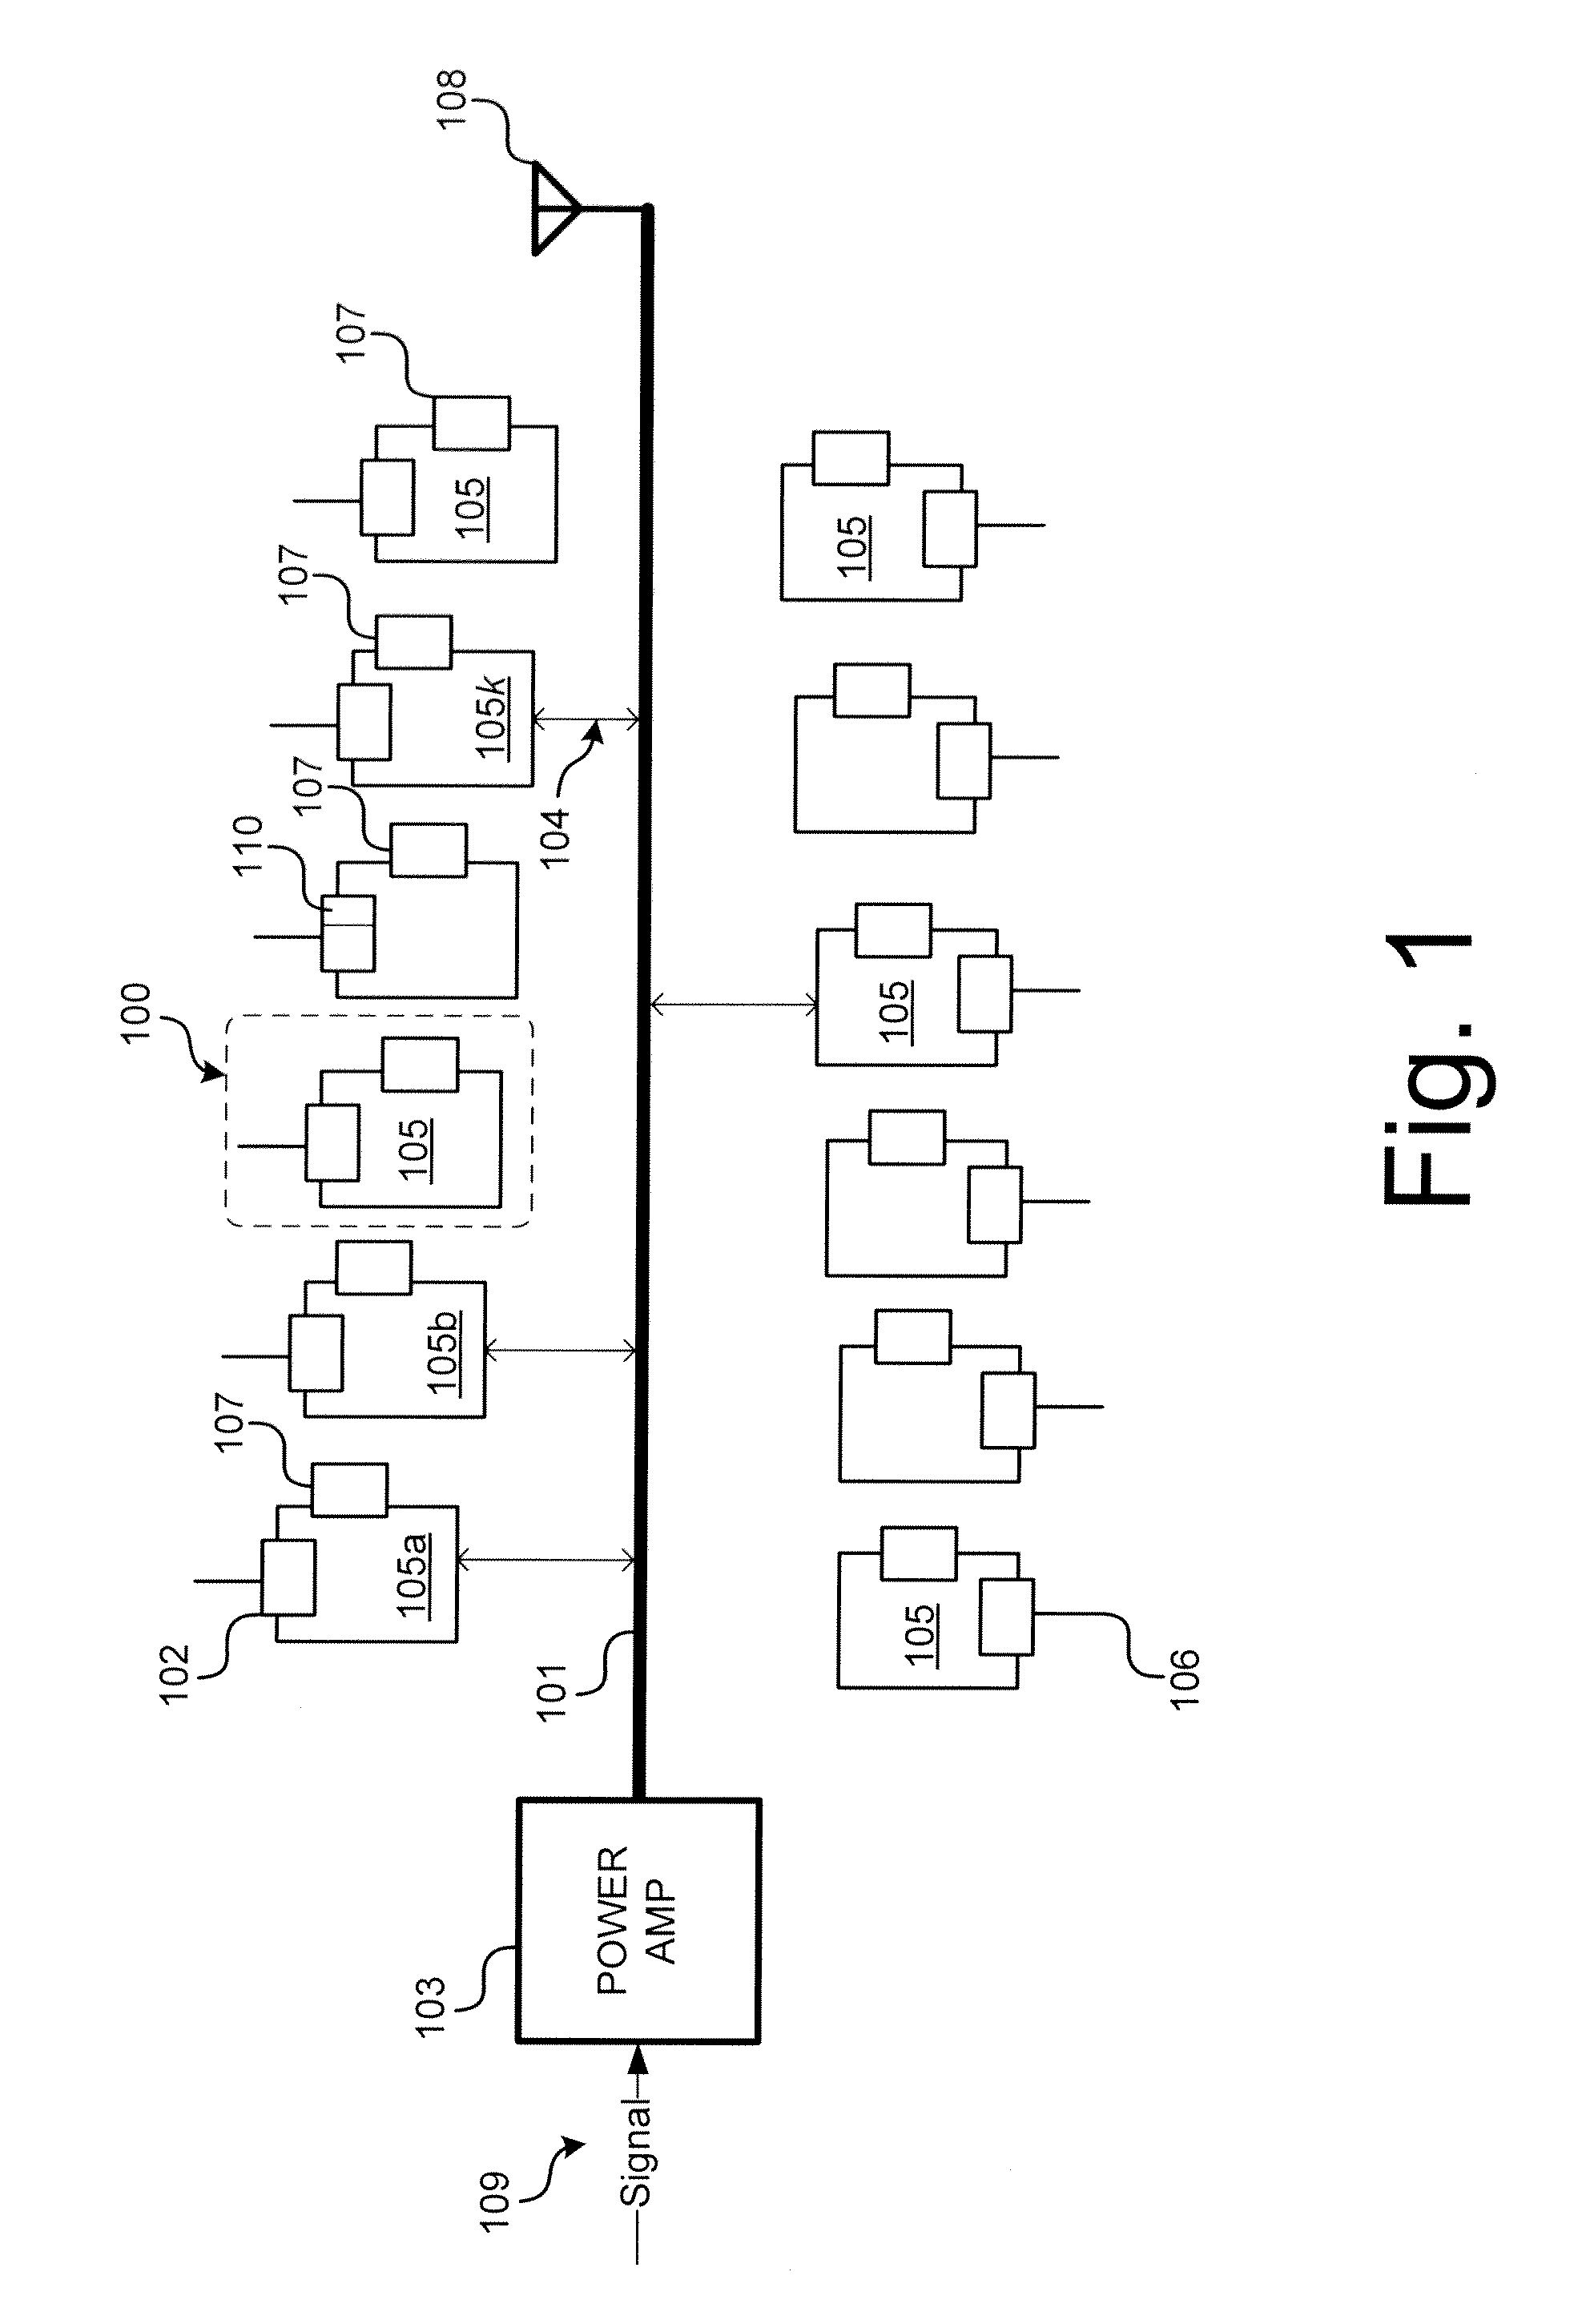 Tunable notch filter including ring resonators having a MEMS capacitor and an attenuator